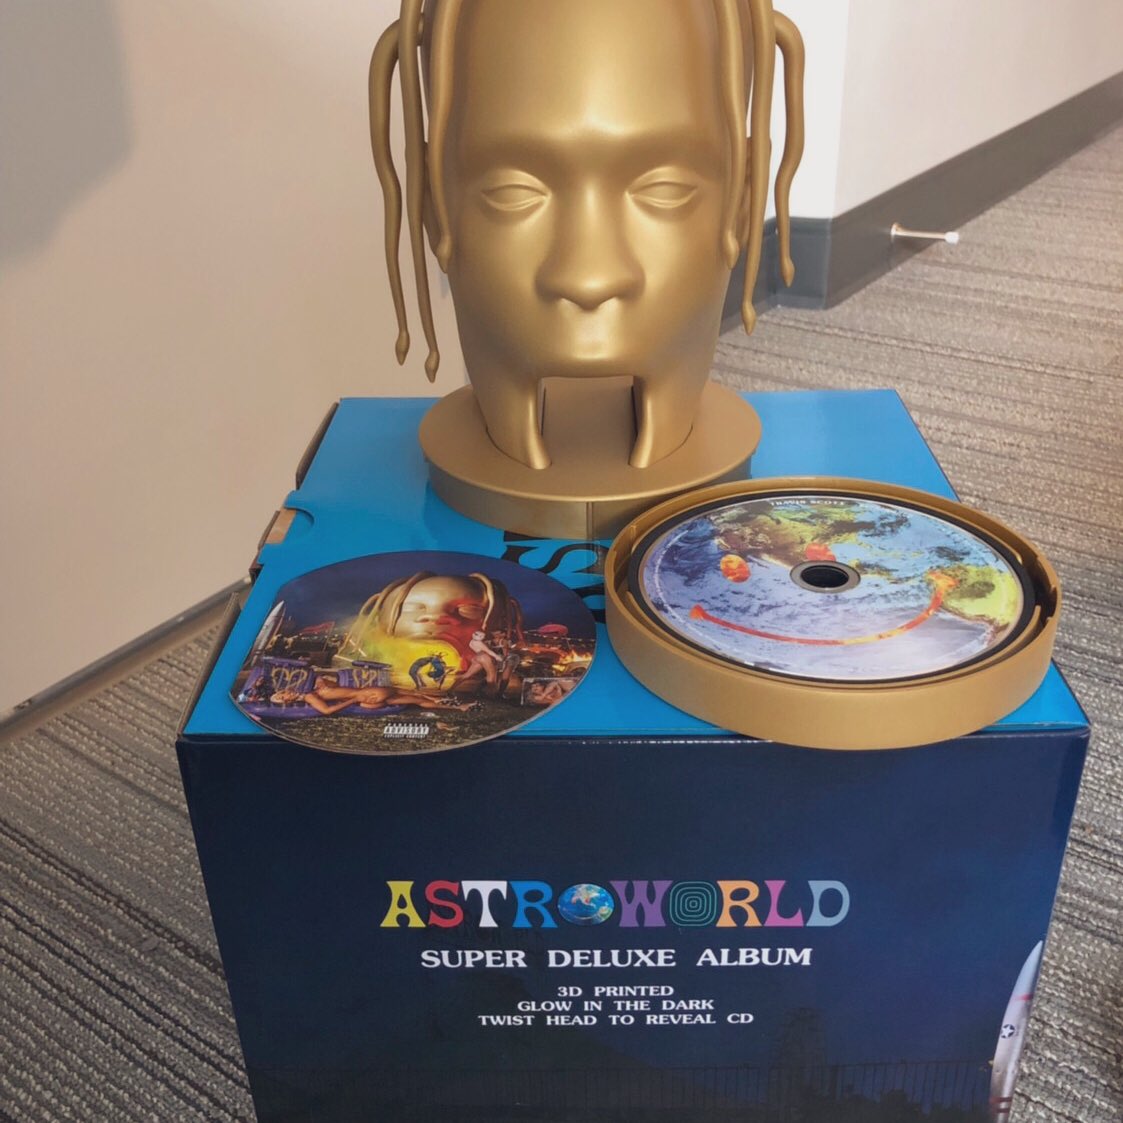 TRAVIS SCOTT FANS 🔥 on X: Some pics that fans took of their Astroworld:  Super Deluxe Album 🔥👀  / X